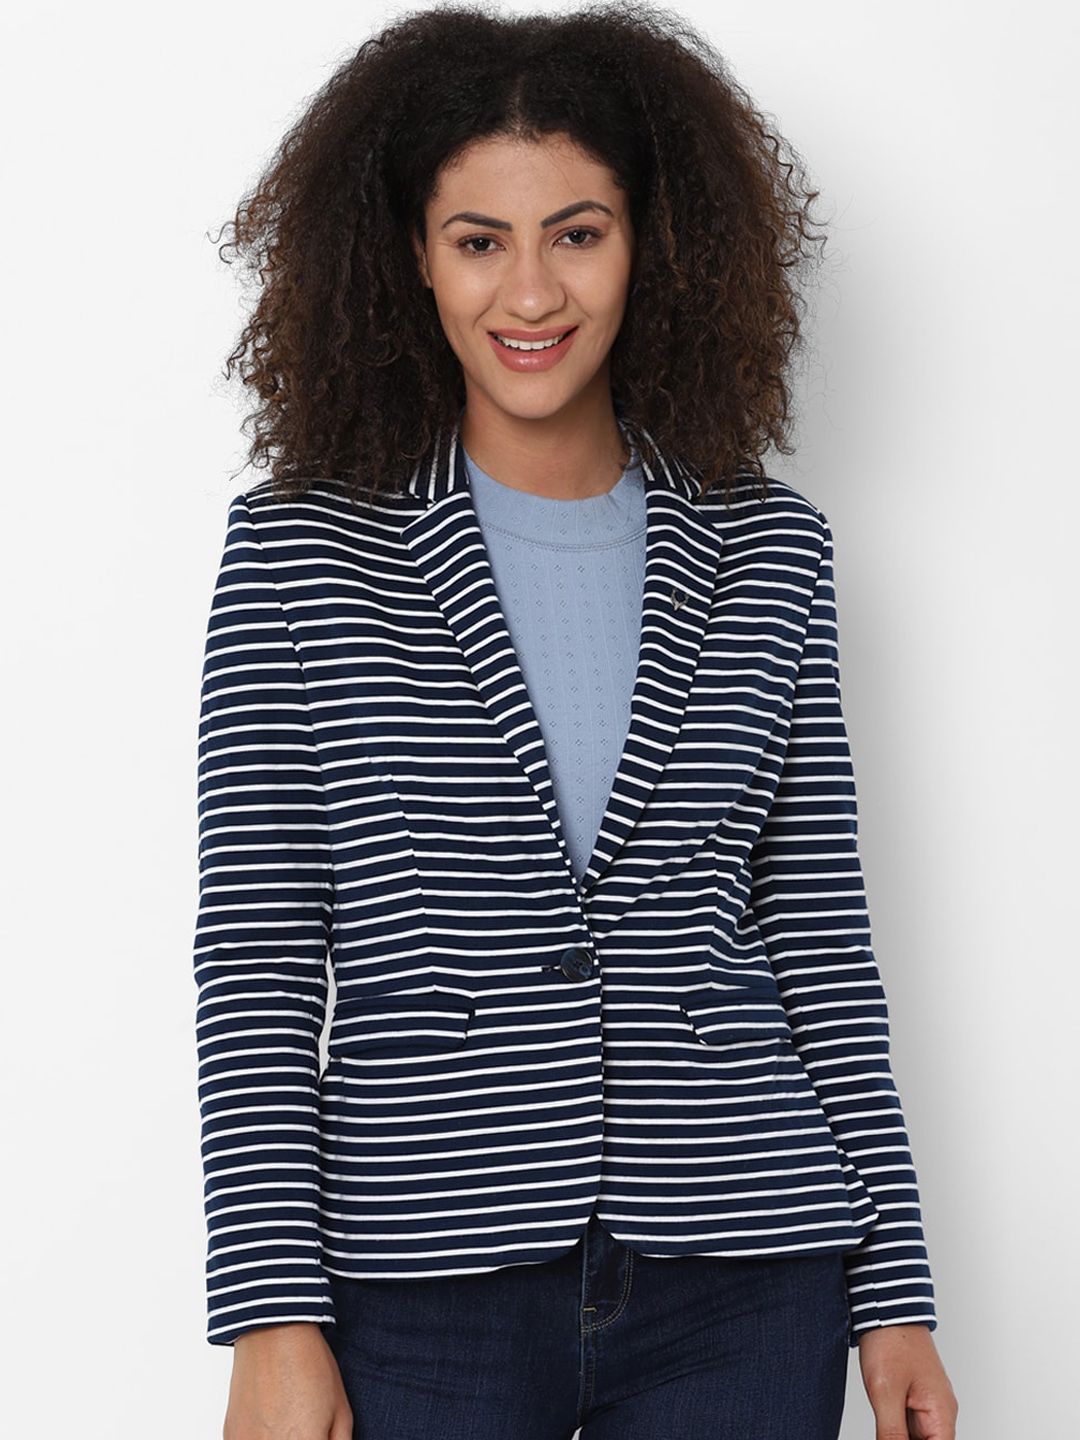 Allen Solly Woman Navy Blue & White Stripped Blazers Price in India